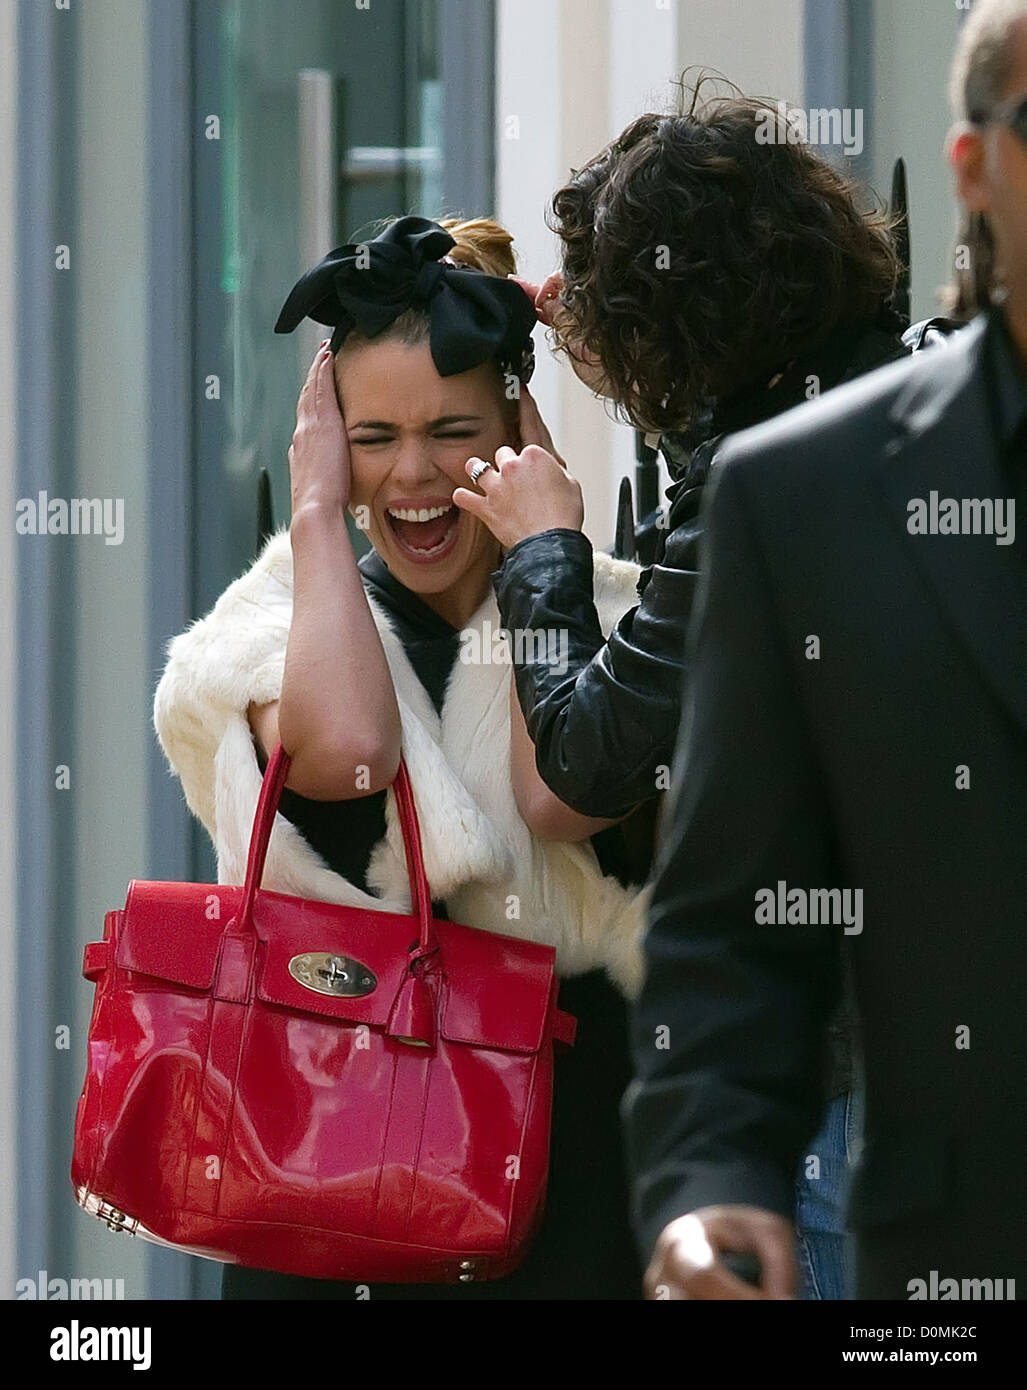 Billie Piper filming on the set of 'Secret Diary of a Call Girl' London, England - 30.08.10 Stock Photo